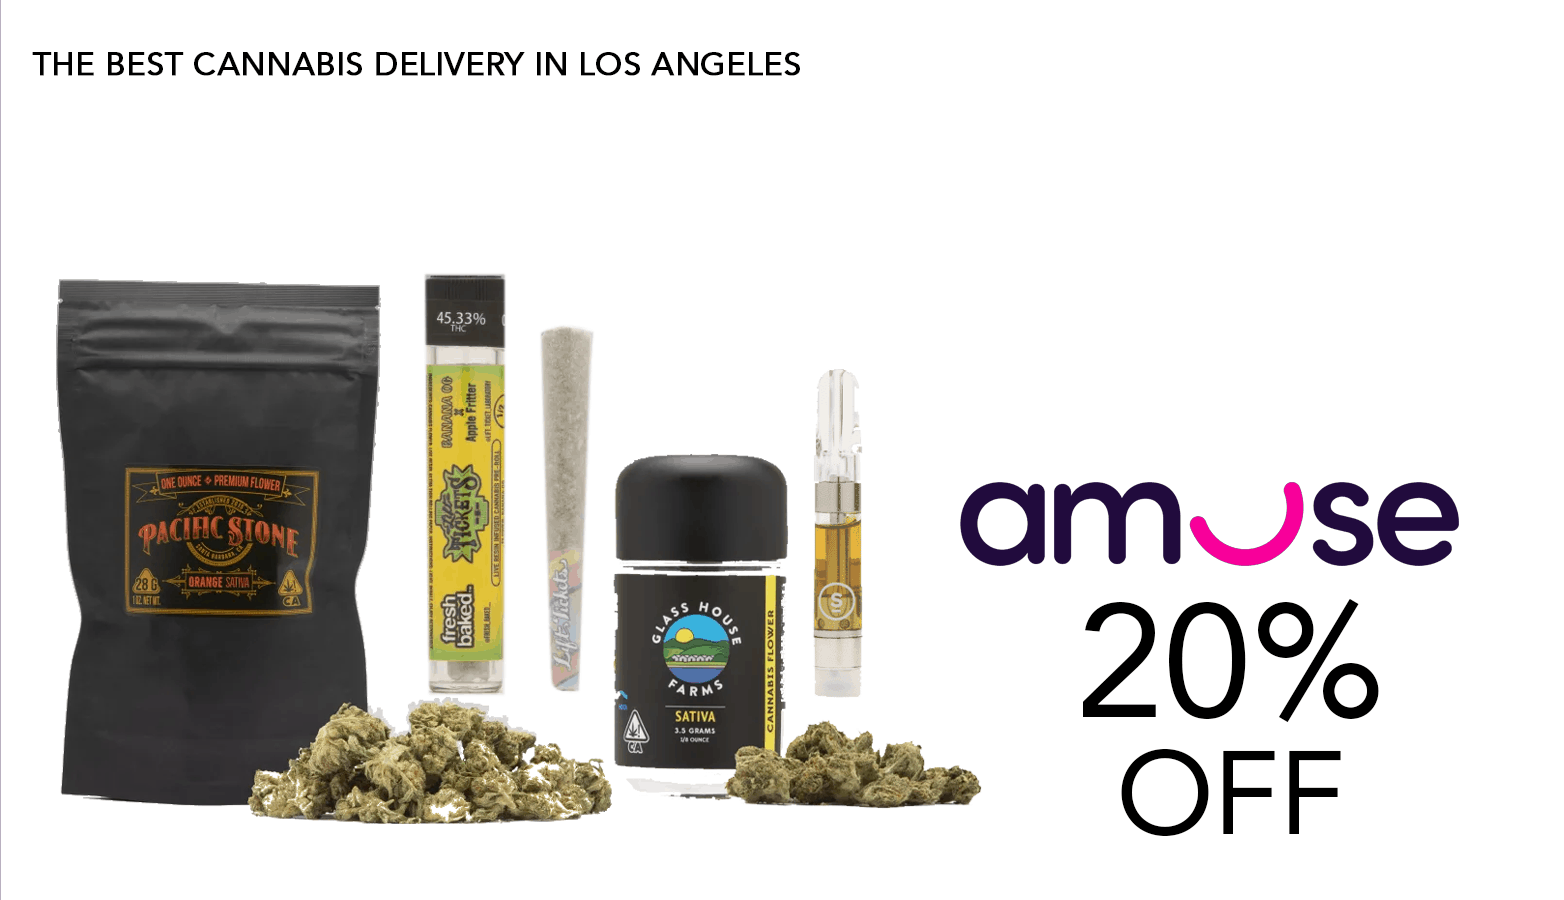 Amuse Cannabis Delivery Coupon Code Offer Website